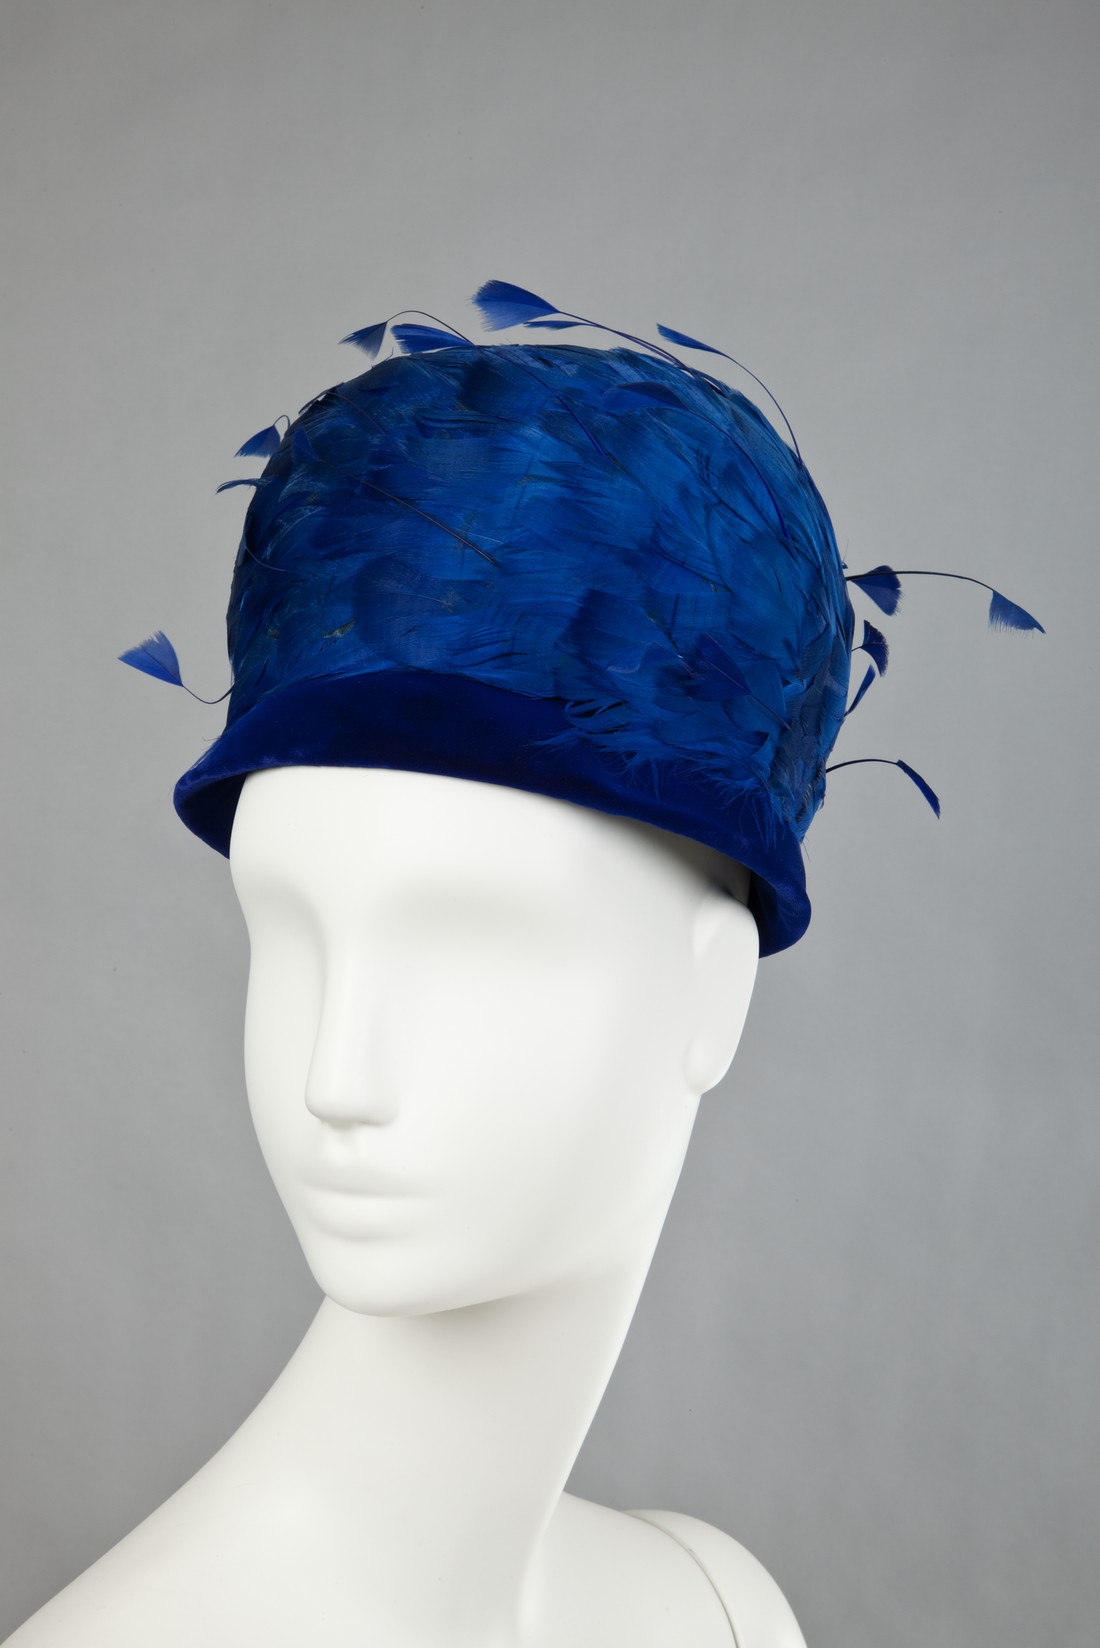 Image of blue feathered hat